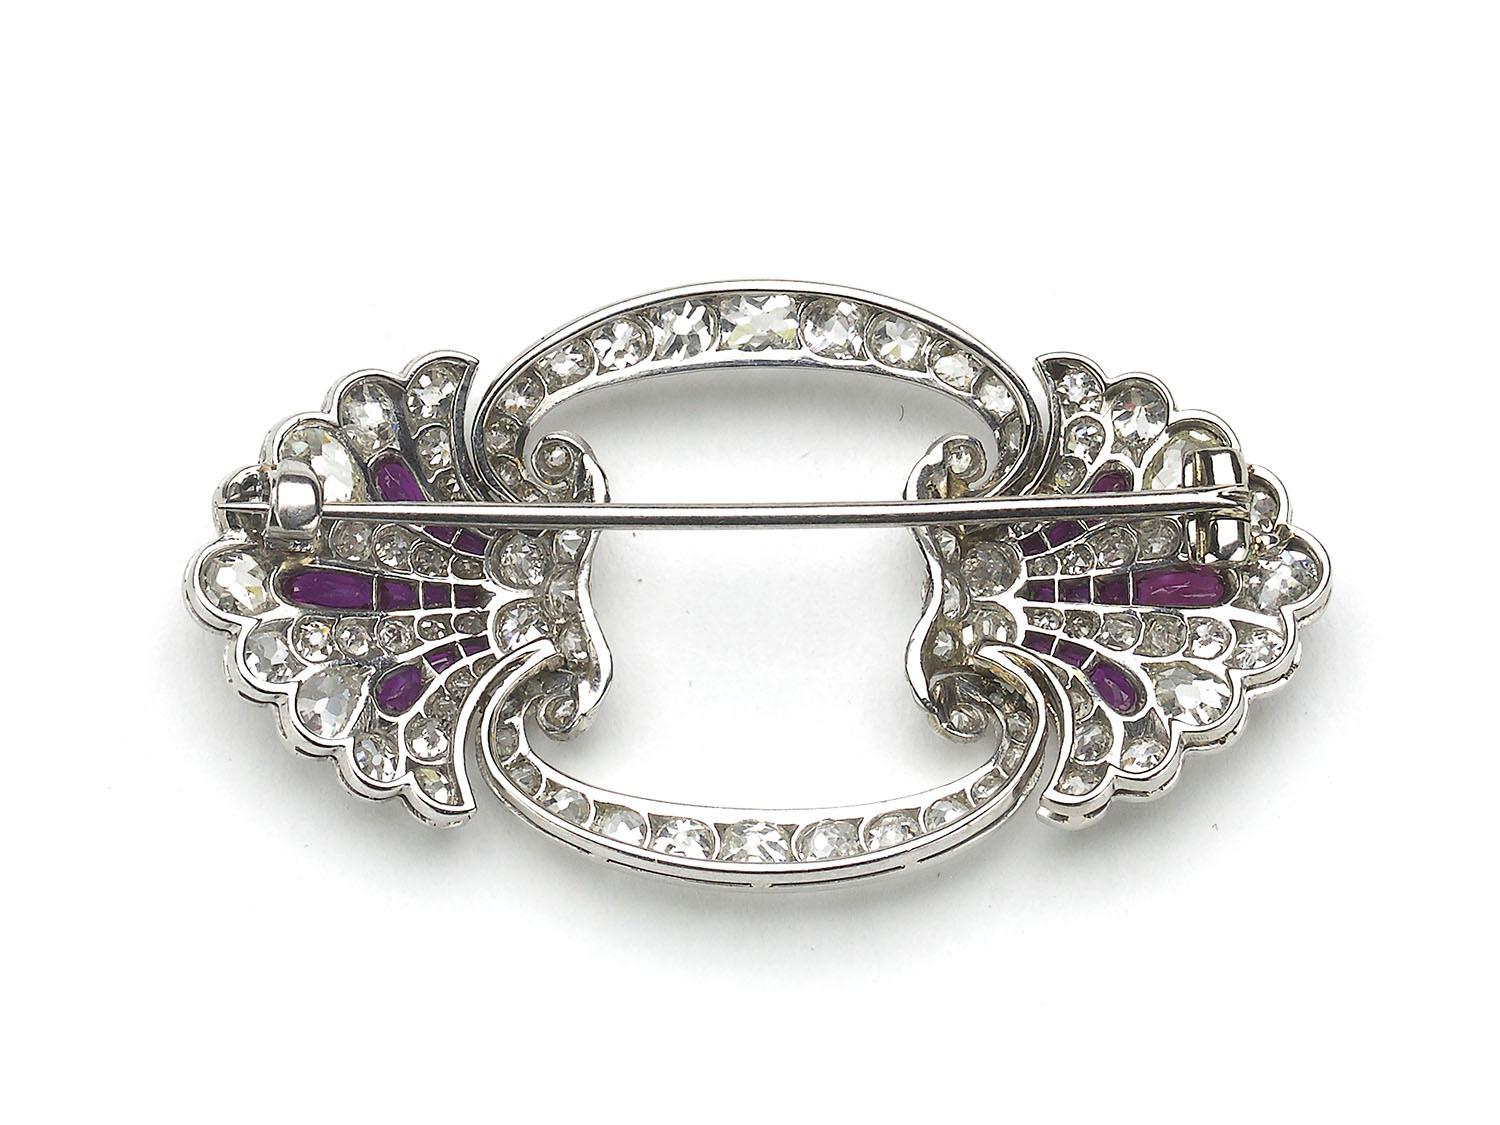 An Art Deco ruby and diamond brooch set with old-cut diamonds, with calibré-cut ruby sprays, mounted in platinum, circa 1935. With an estimated total diamond weight of 3.20ct.